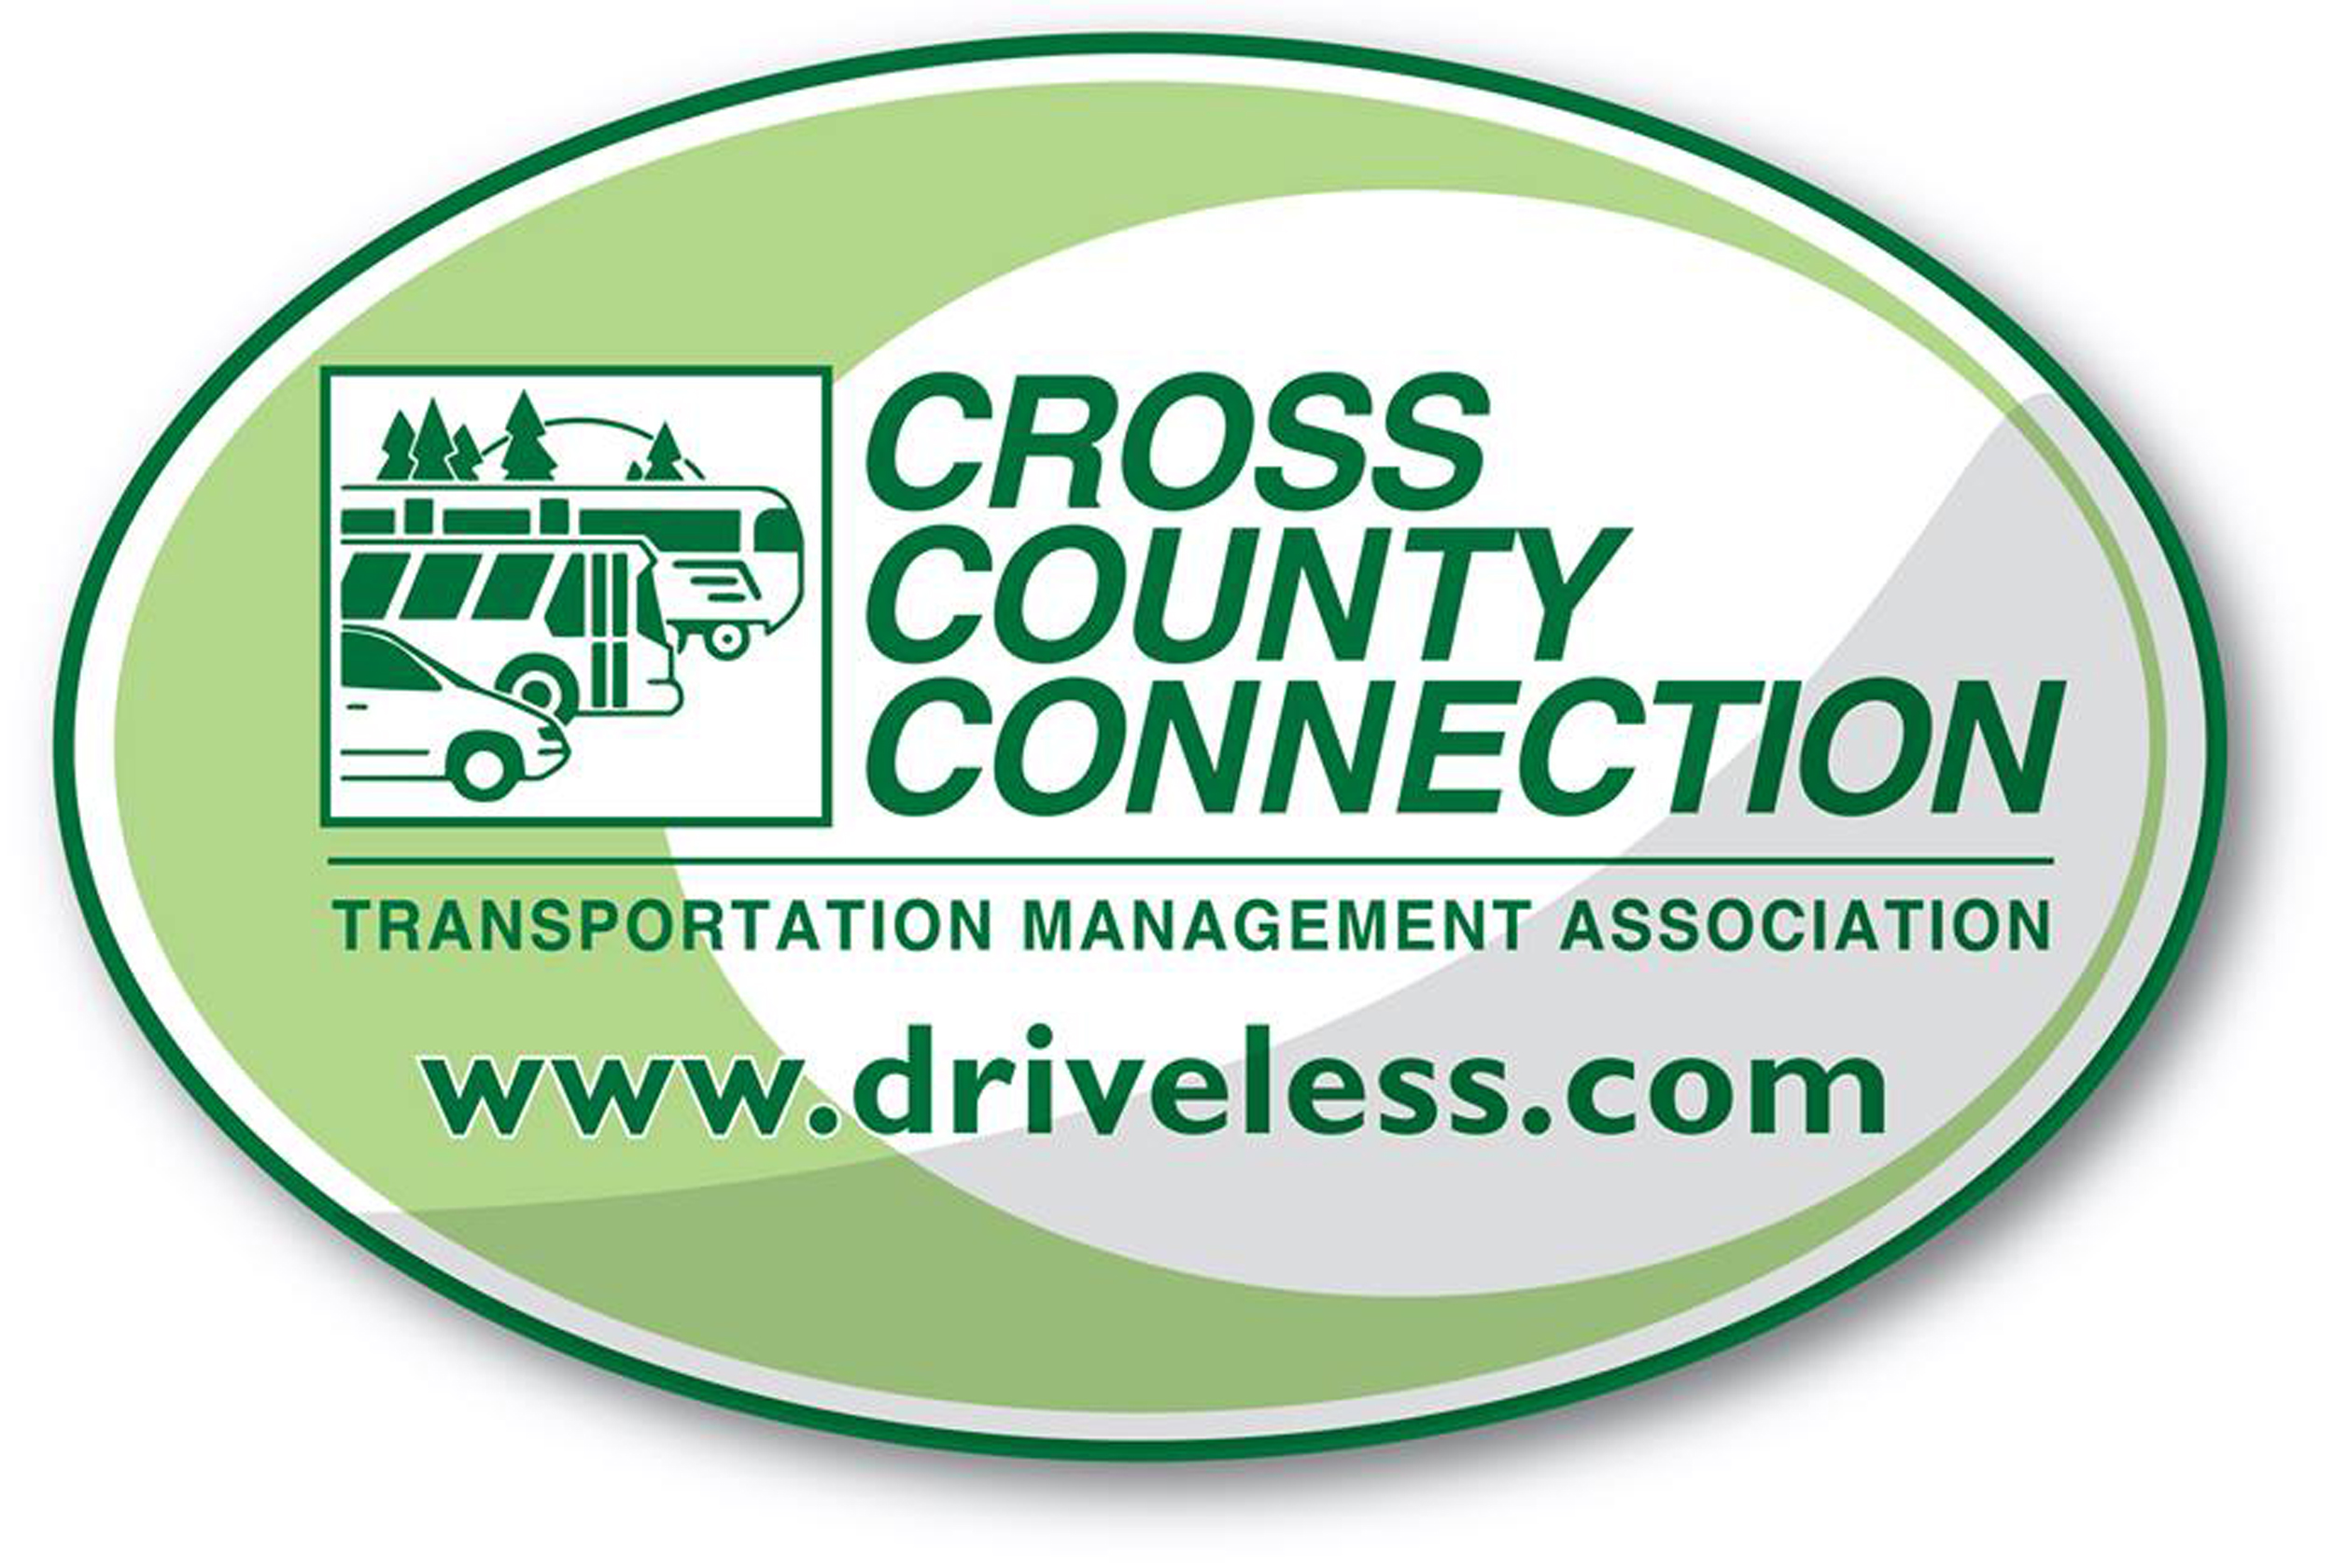 Cross County Connection TMA